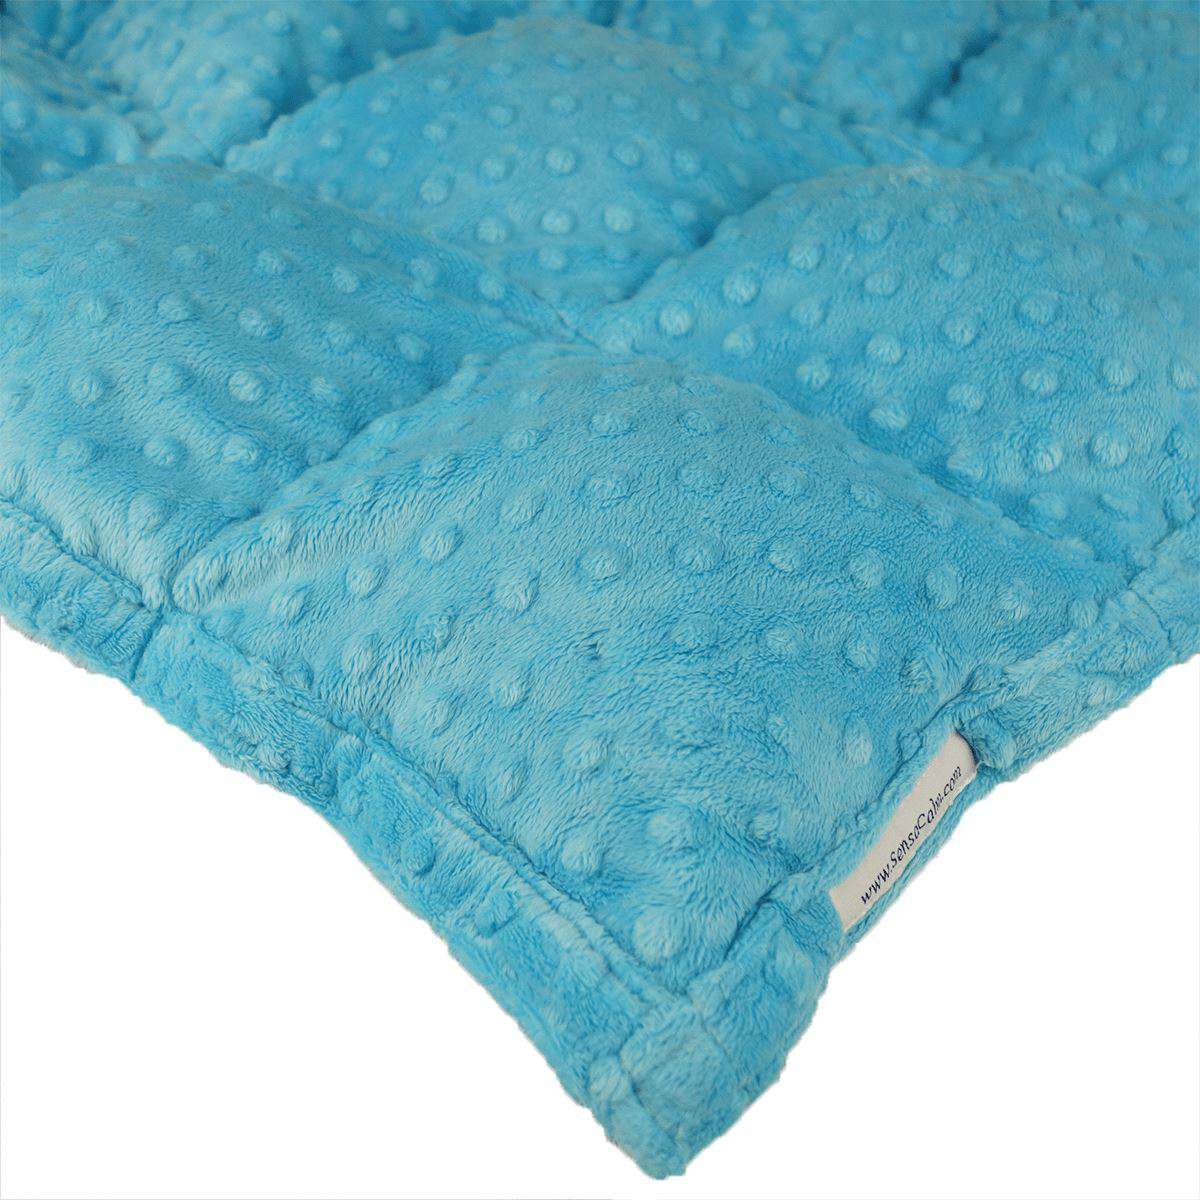 SensaCalm Cuddle Weighted Blanket - Dimple Turquoise Custom Weighted Blanket